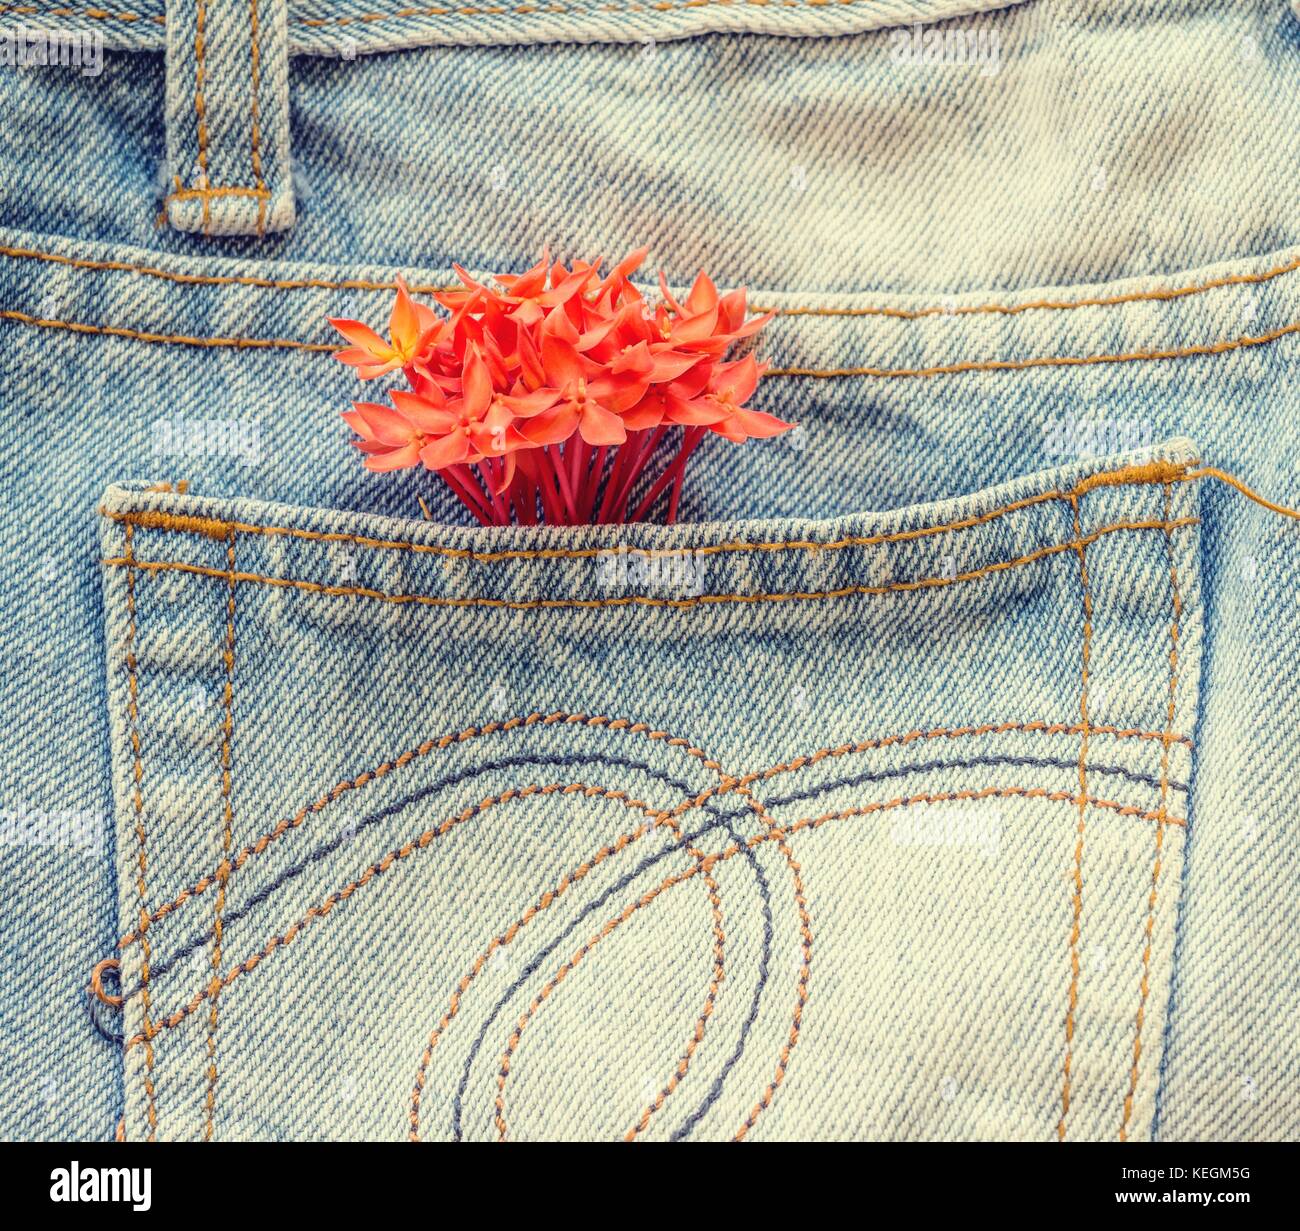 flower on the jeans Stock Photo - Alamy